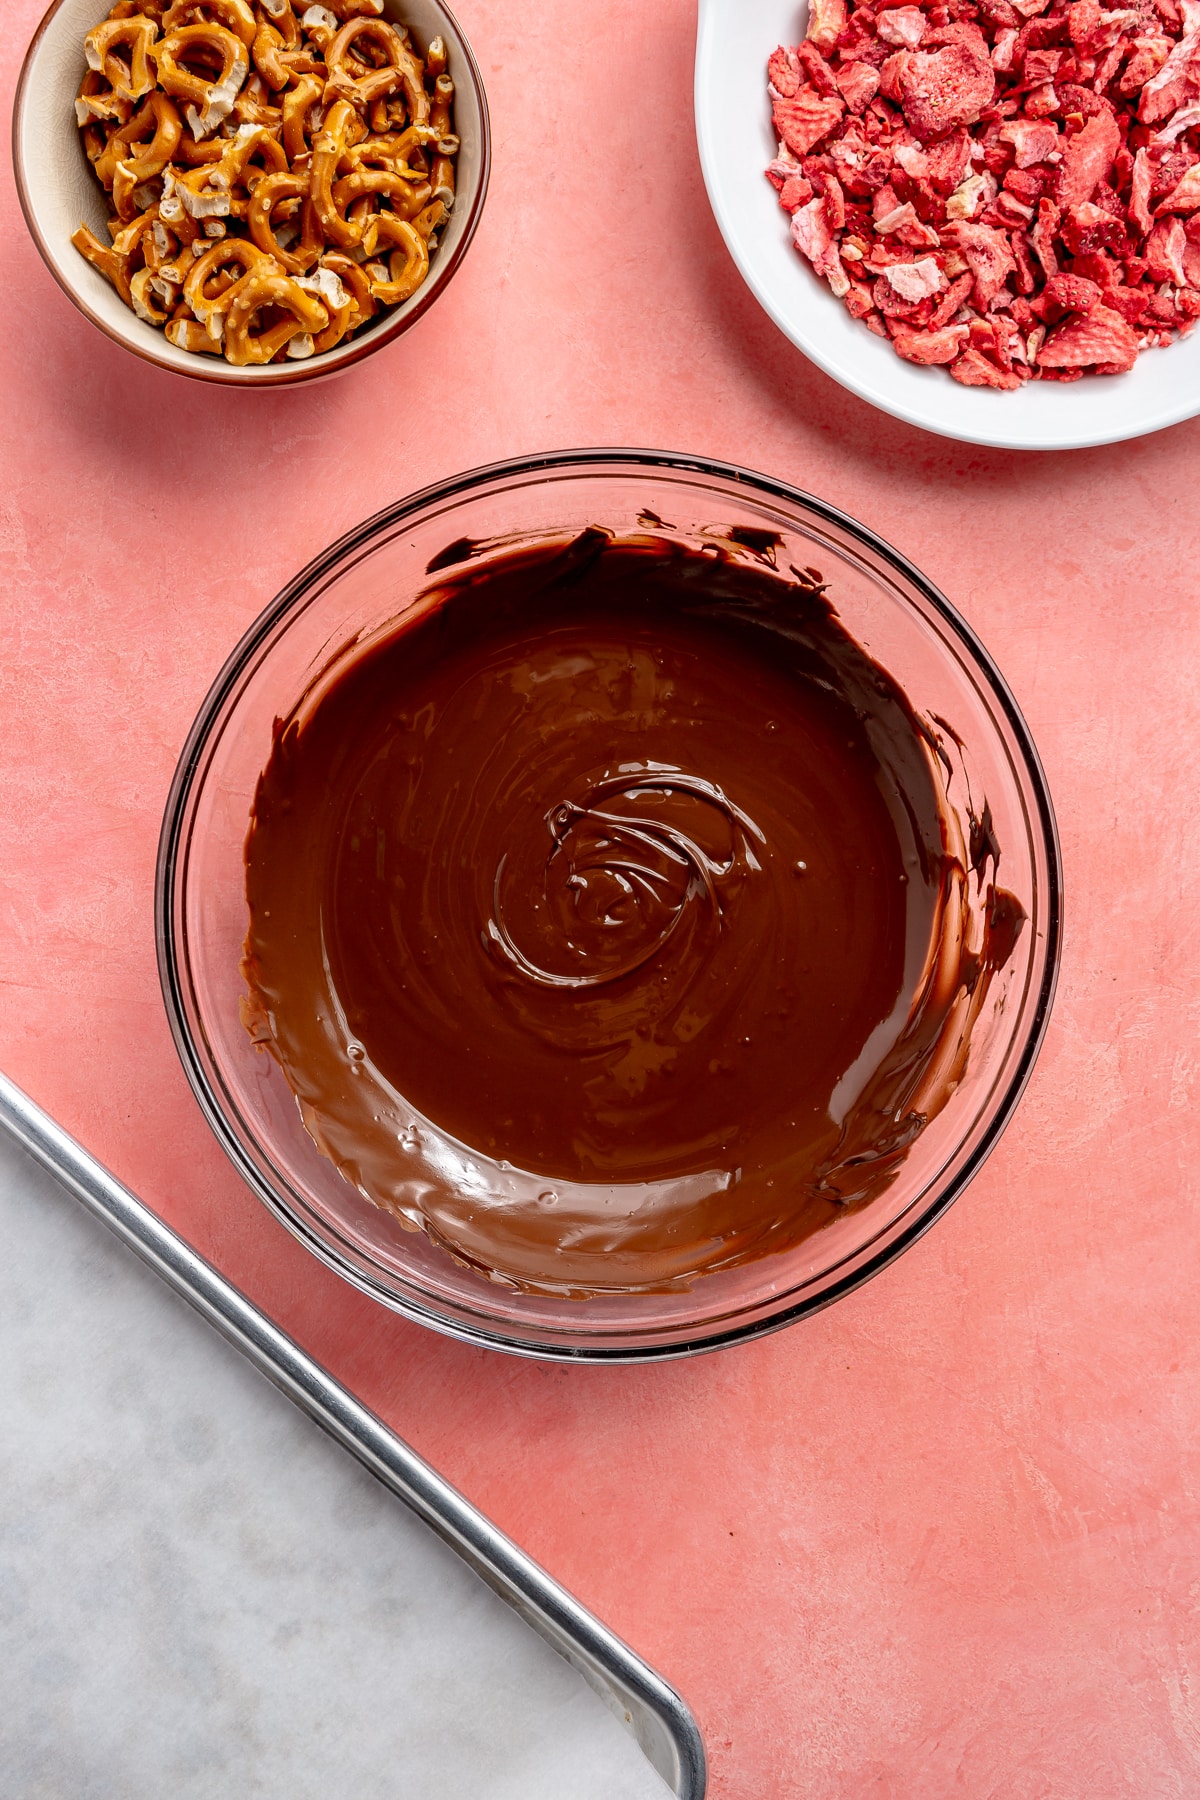 Melted chocolate sits in a glass bowl. A bowl of pretzels and a bowl of freeze-dried strawberries sit to the side.